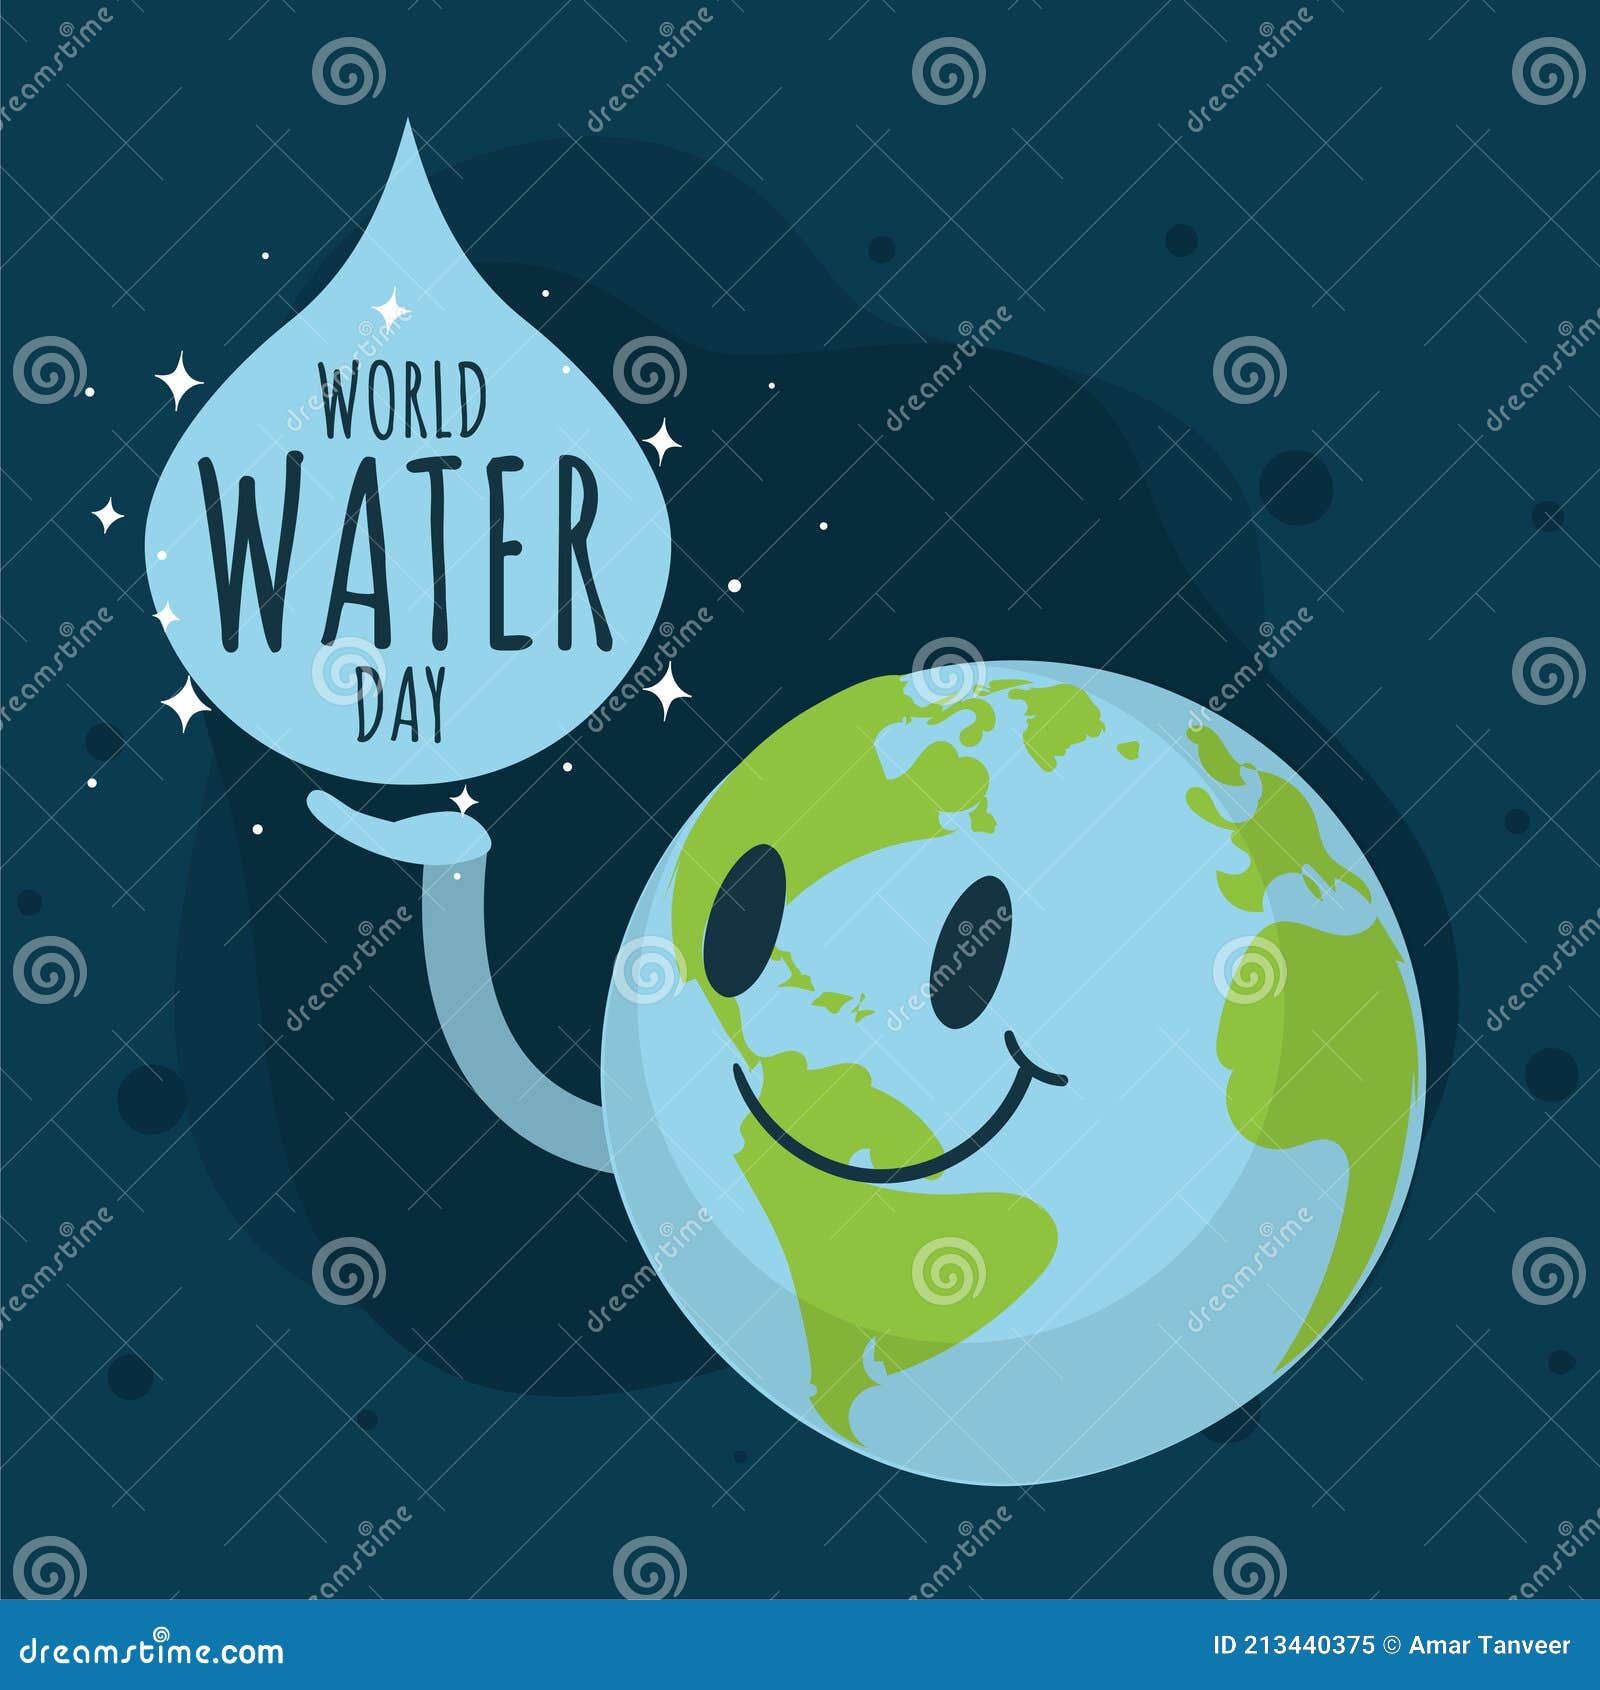 World Water Day Poster, Save Water, Earth and Water Droplet Illustration  Vector Stock Vector - Illustration of clean, conservation: 213440375